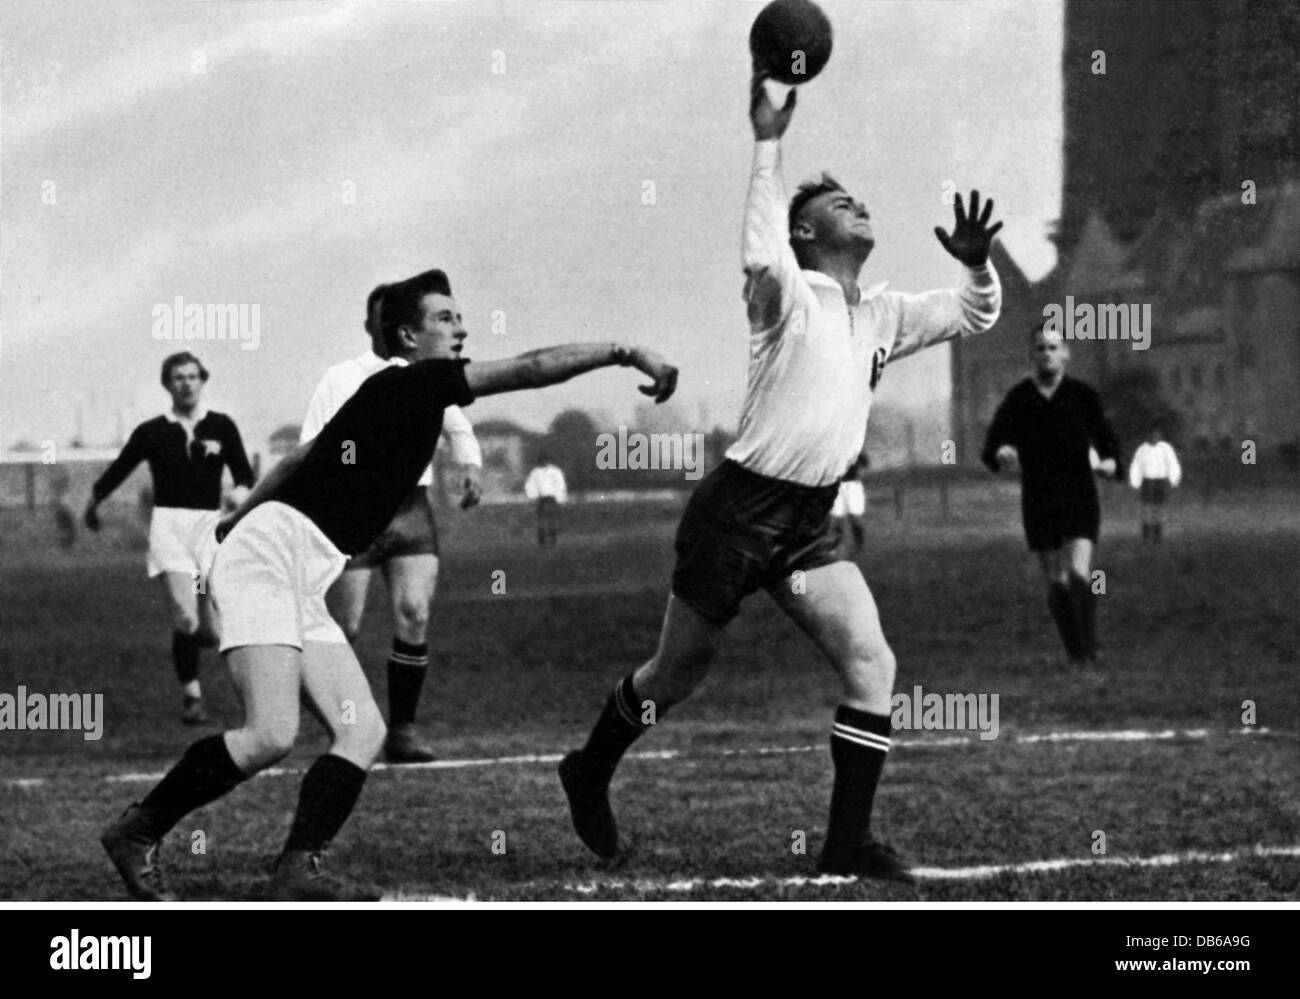 sports, handball, German championship, circa 1935, Additional-Rights-Clearences-Not Available Stock Photo